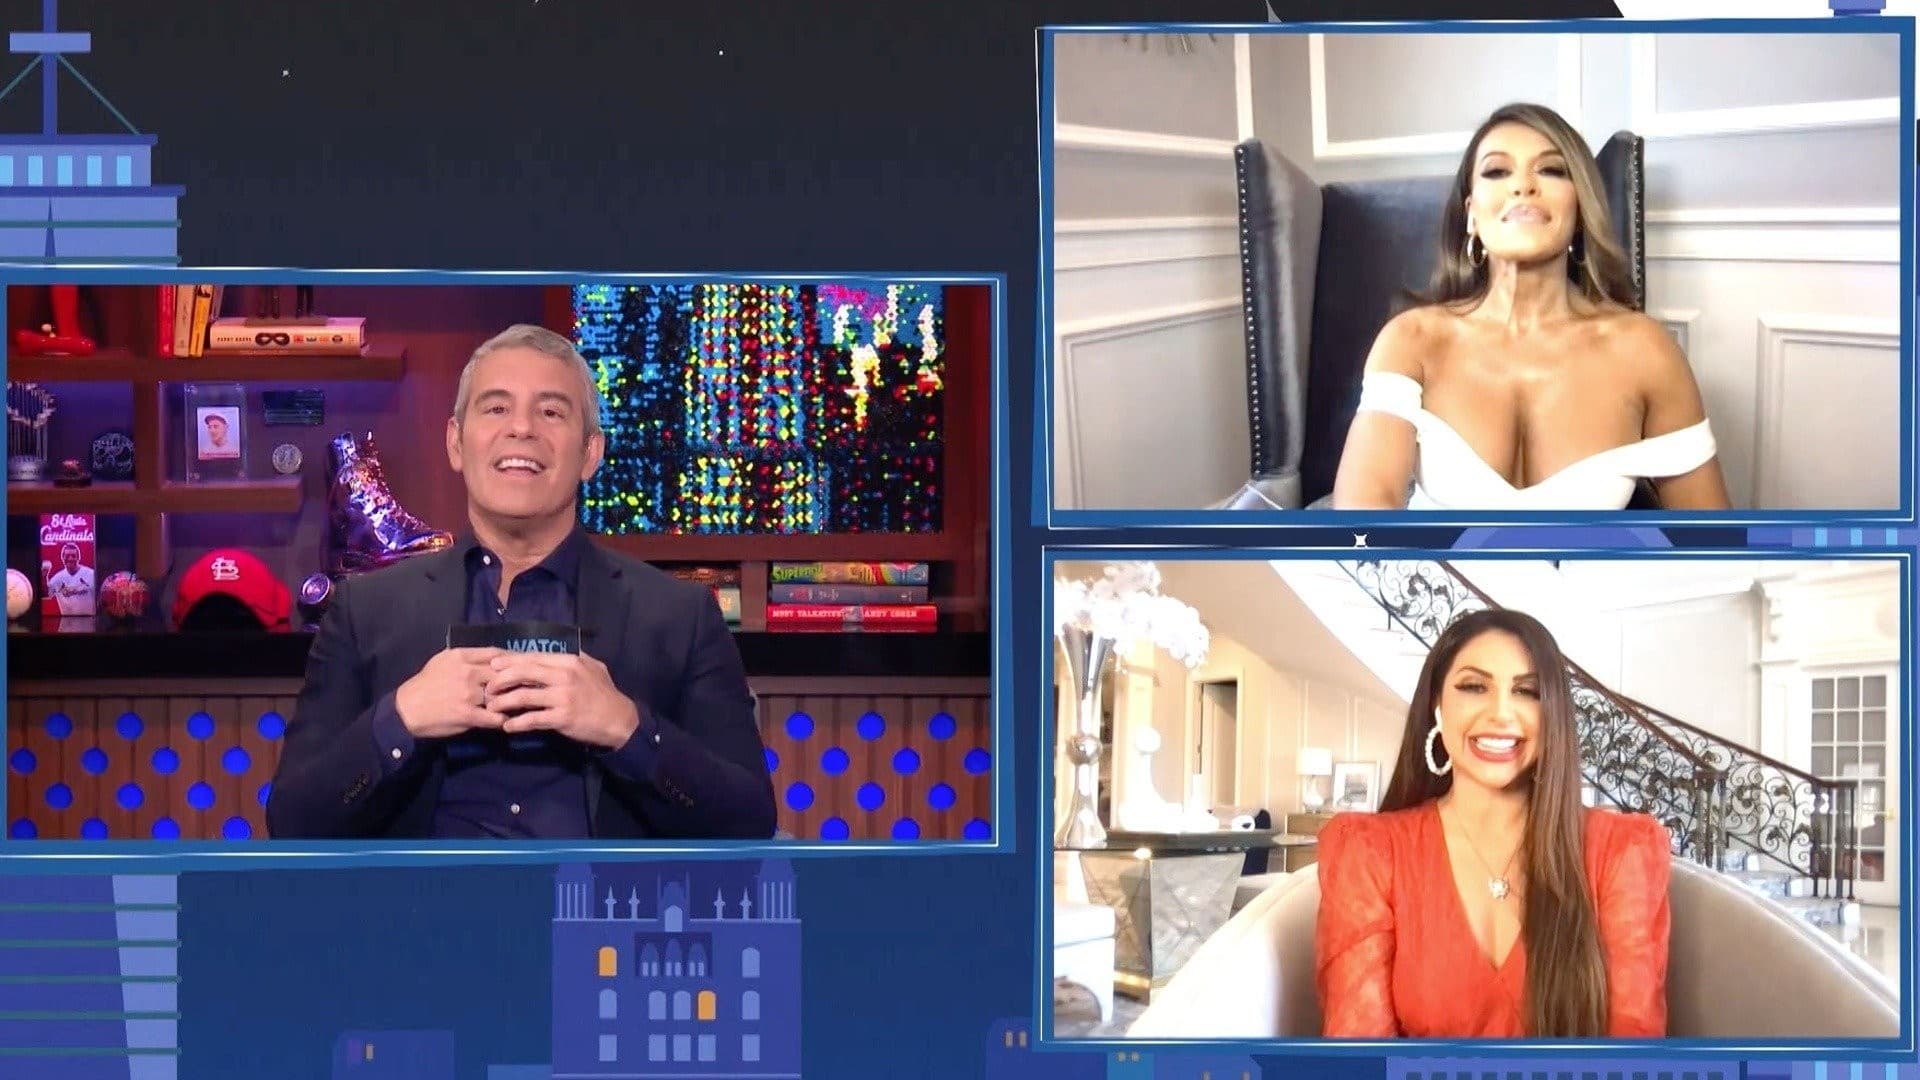 Watch What Happens Live with Andy Cohen Staffel 18 :Folge 77 